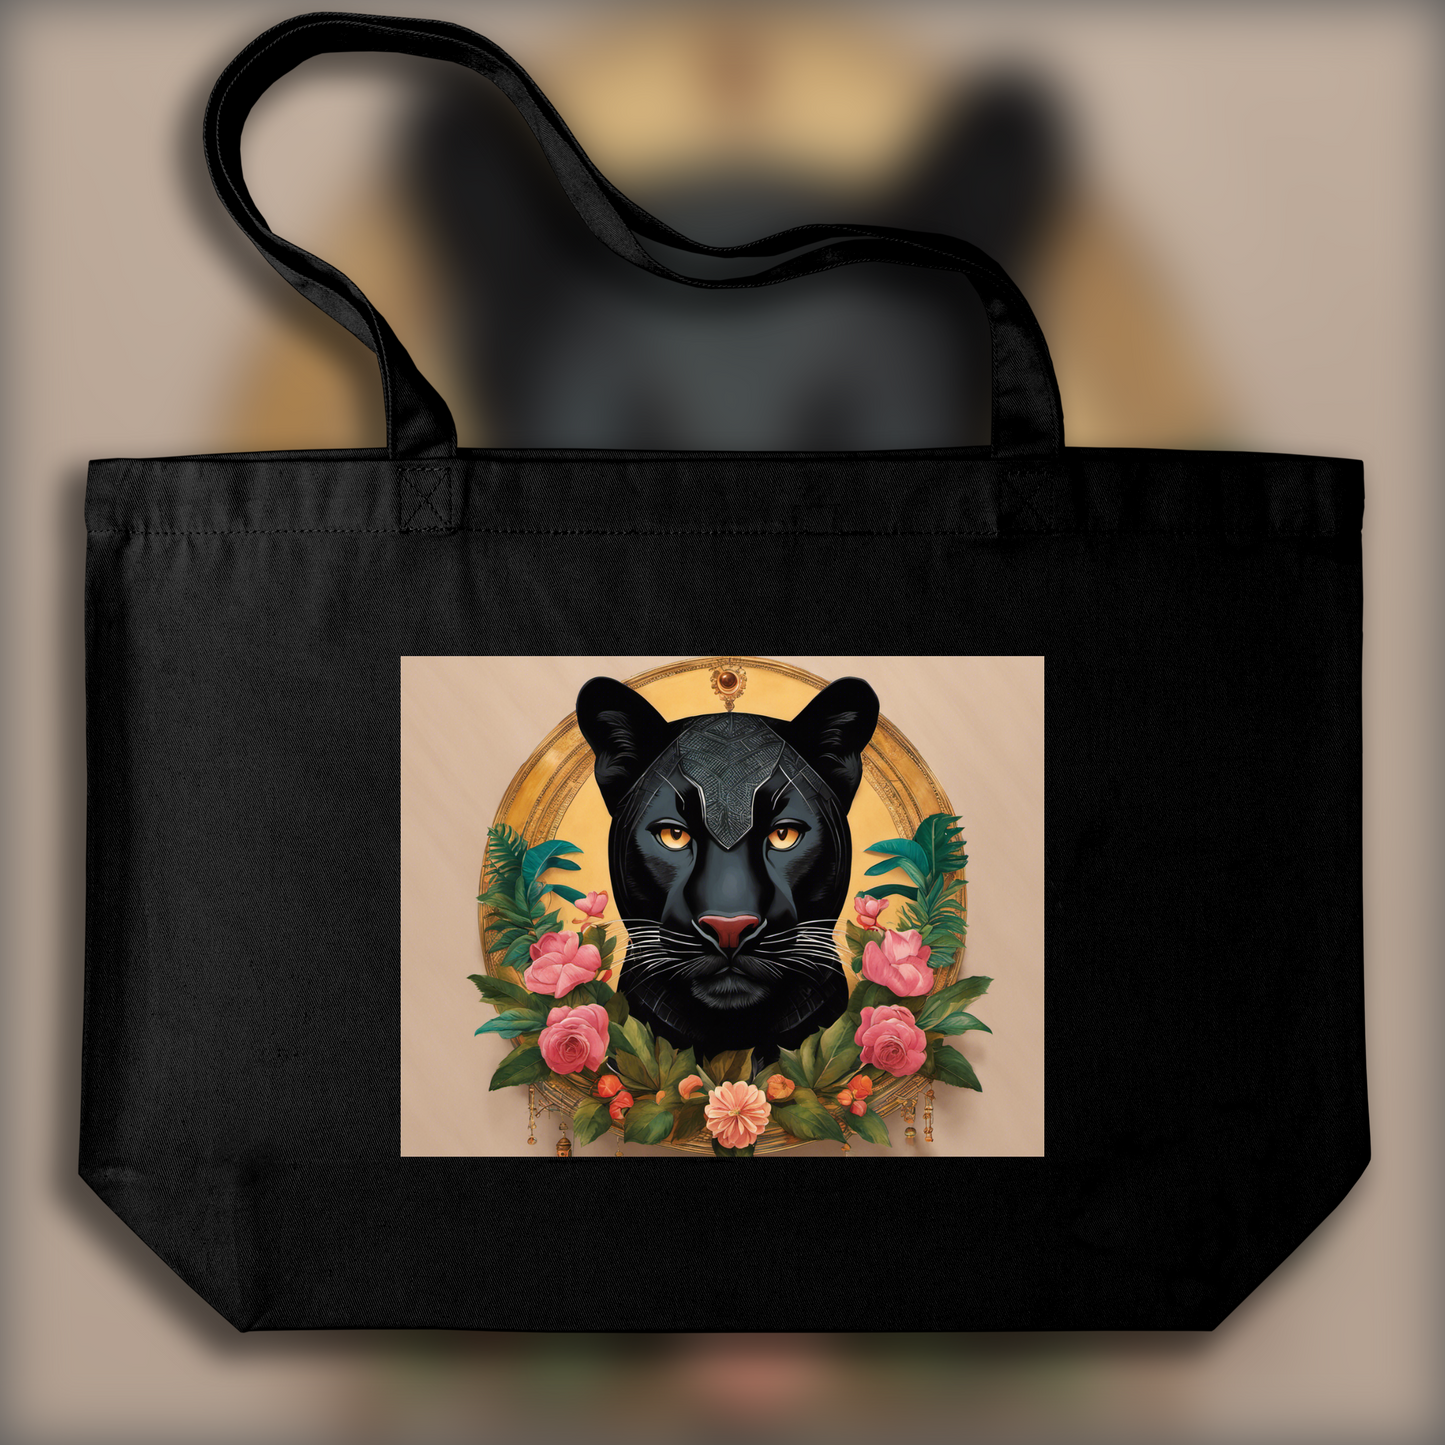 Tote bag large - Wes Anderson, a black panther - 3093808373